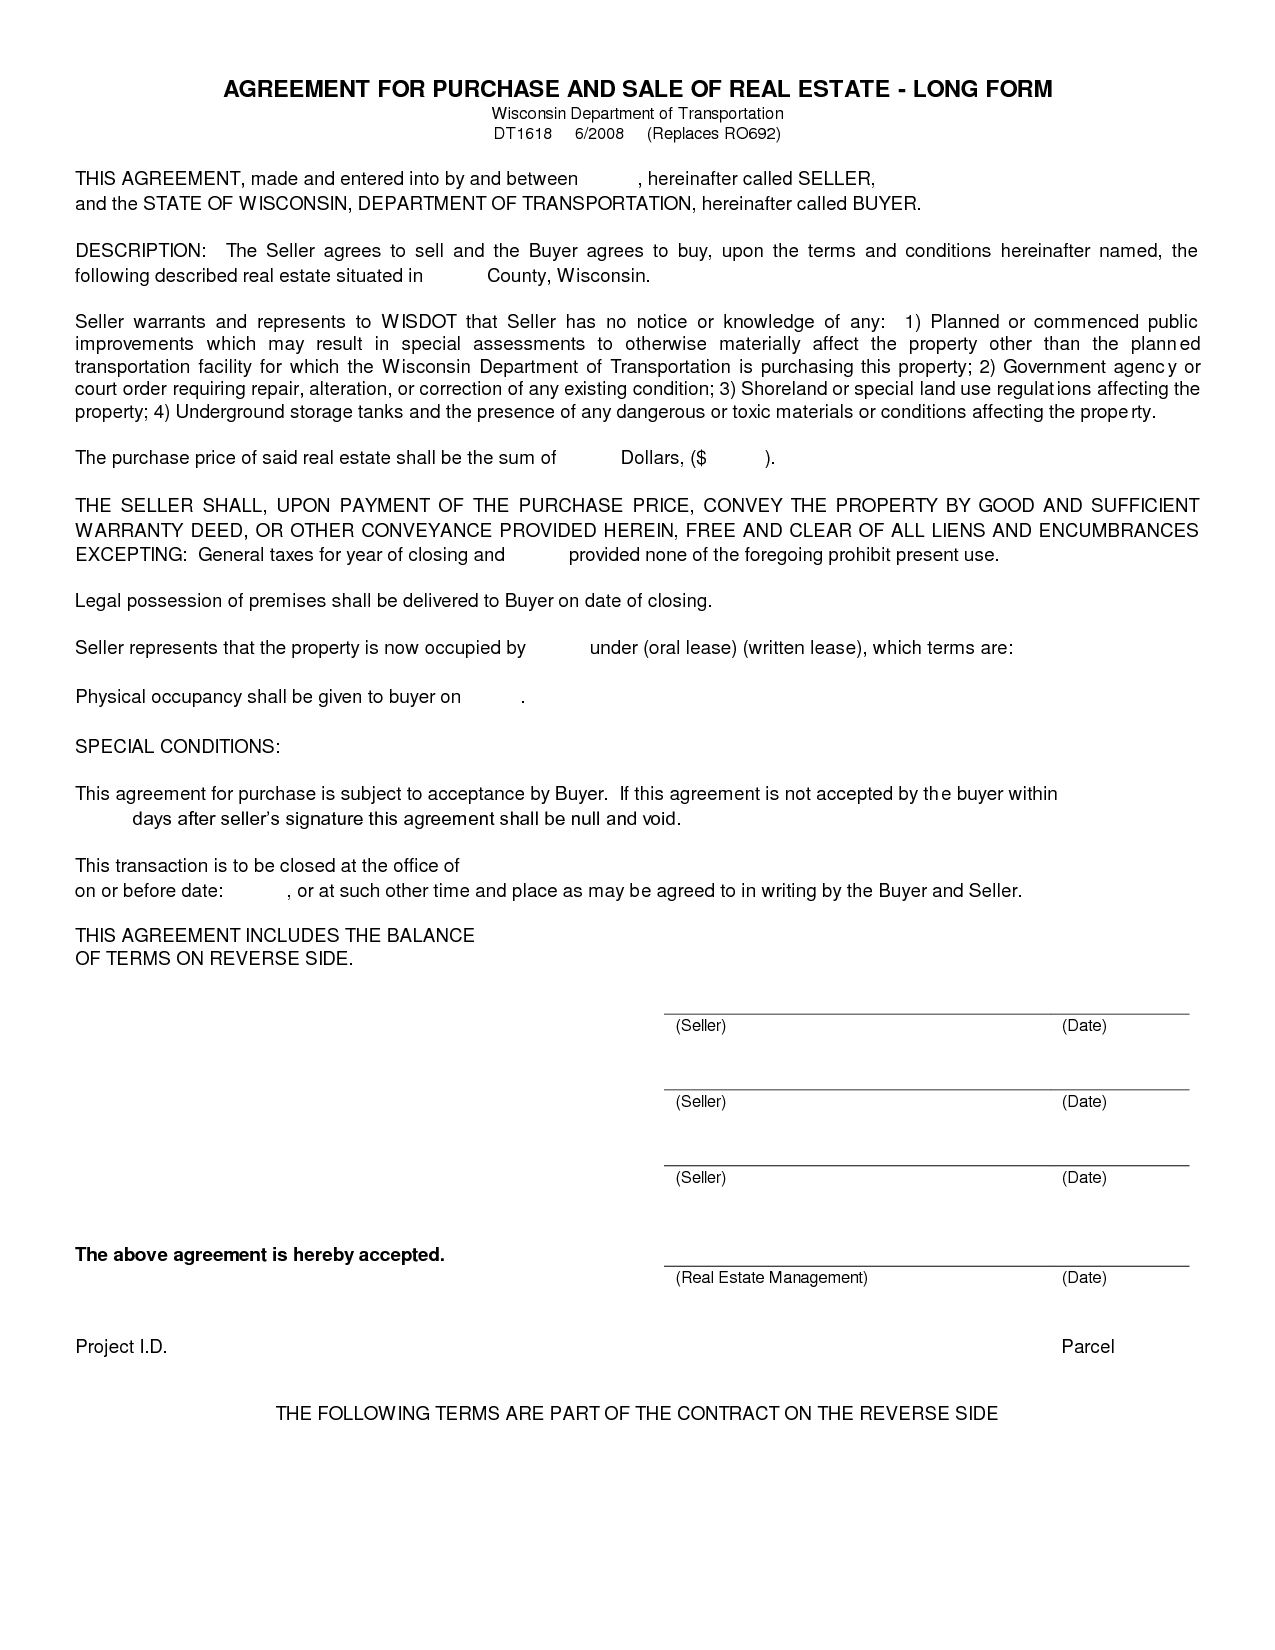 Free Blank Purchase Agreement Form Images - Agreement To Purchase - Free Printable Real Estate Forms